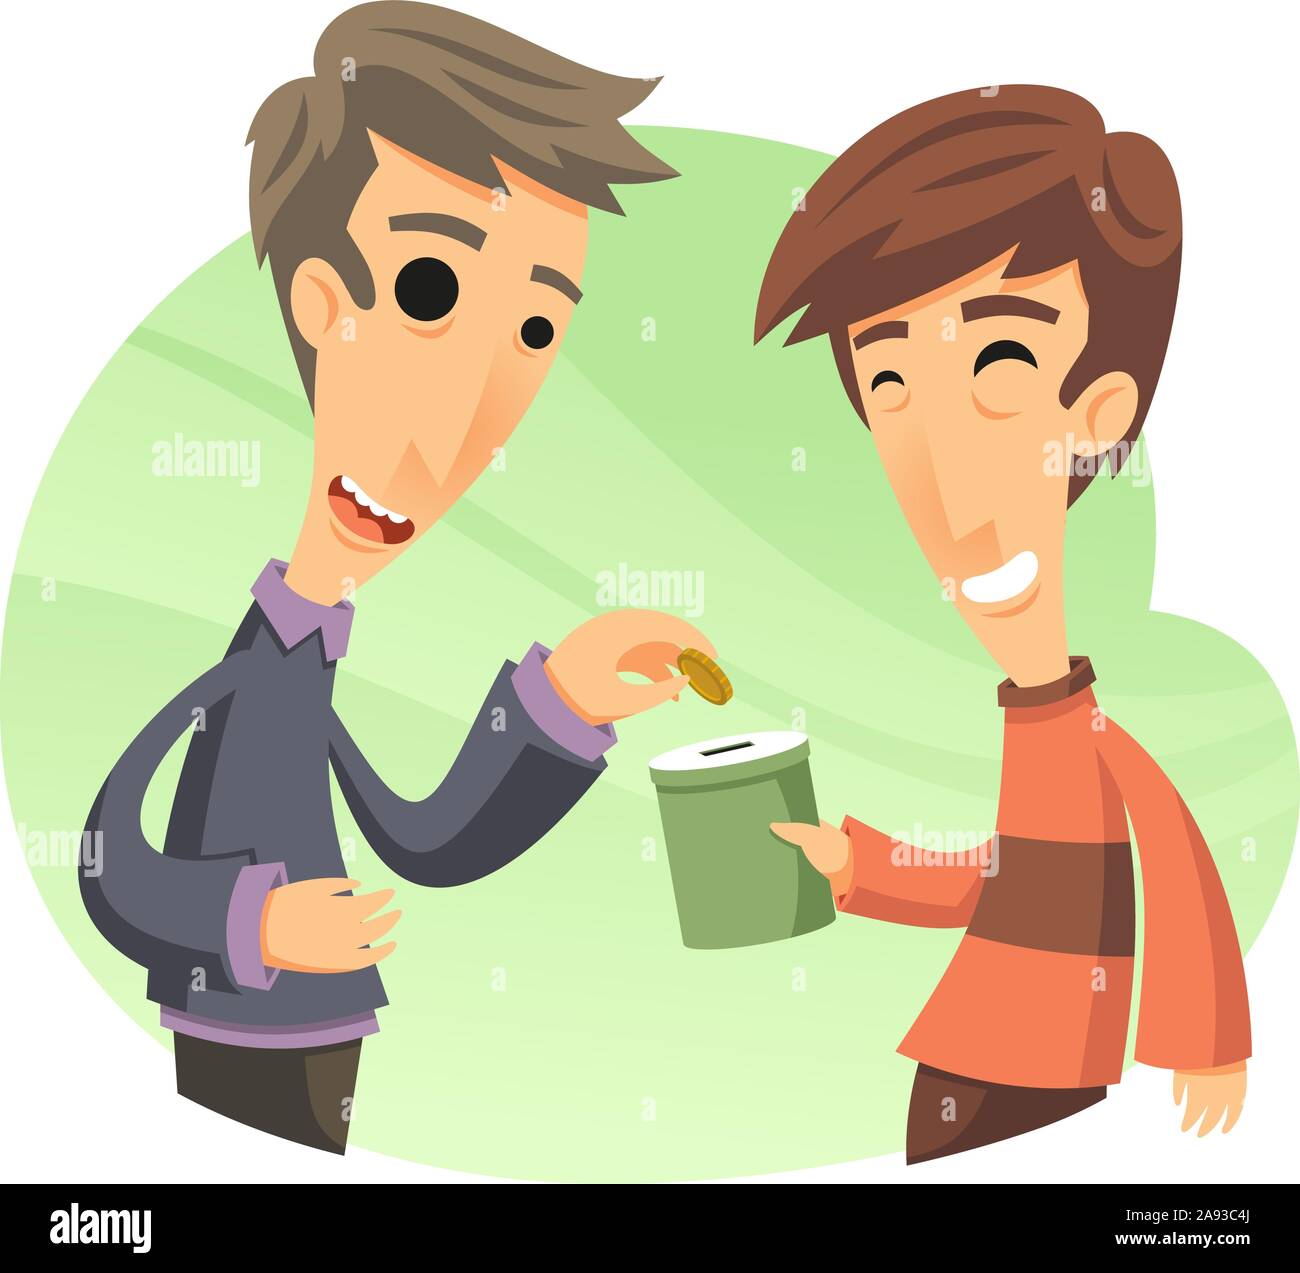 man donating for a cause cartoon illustration Stock Vector